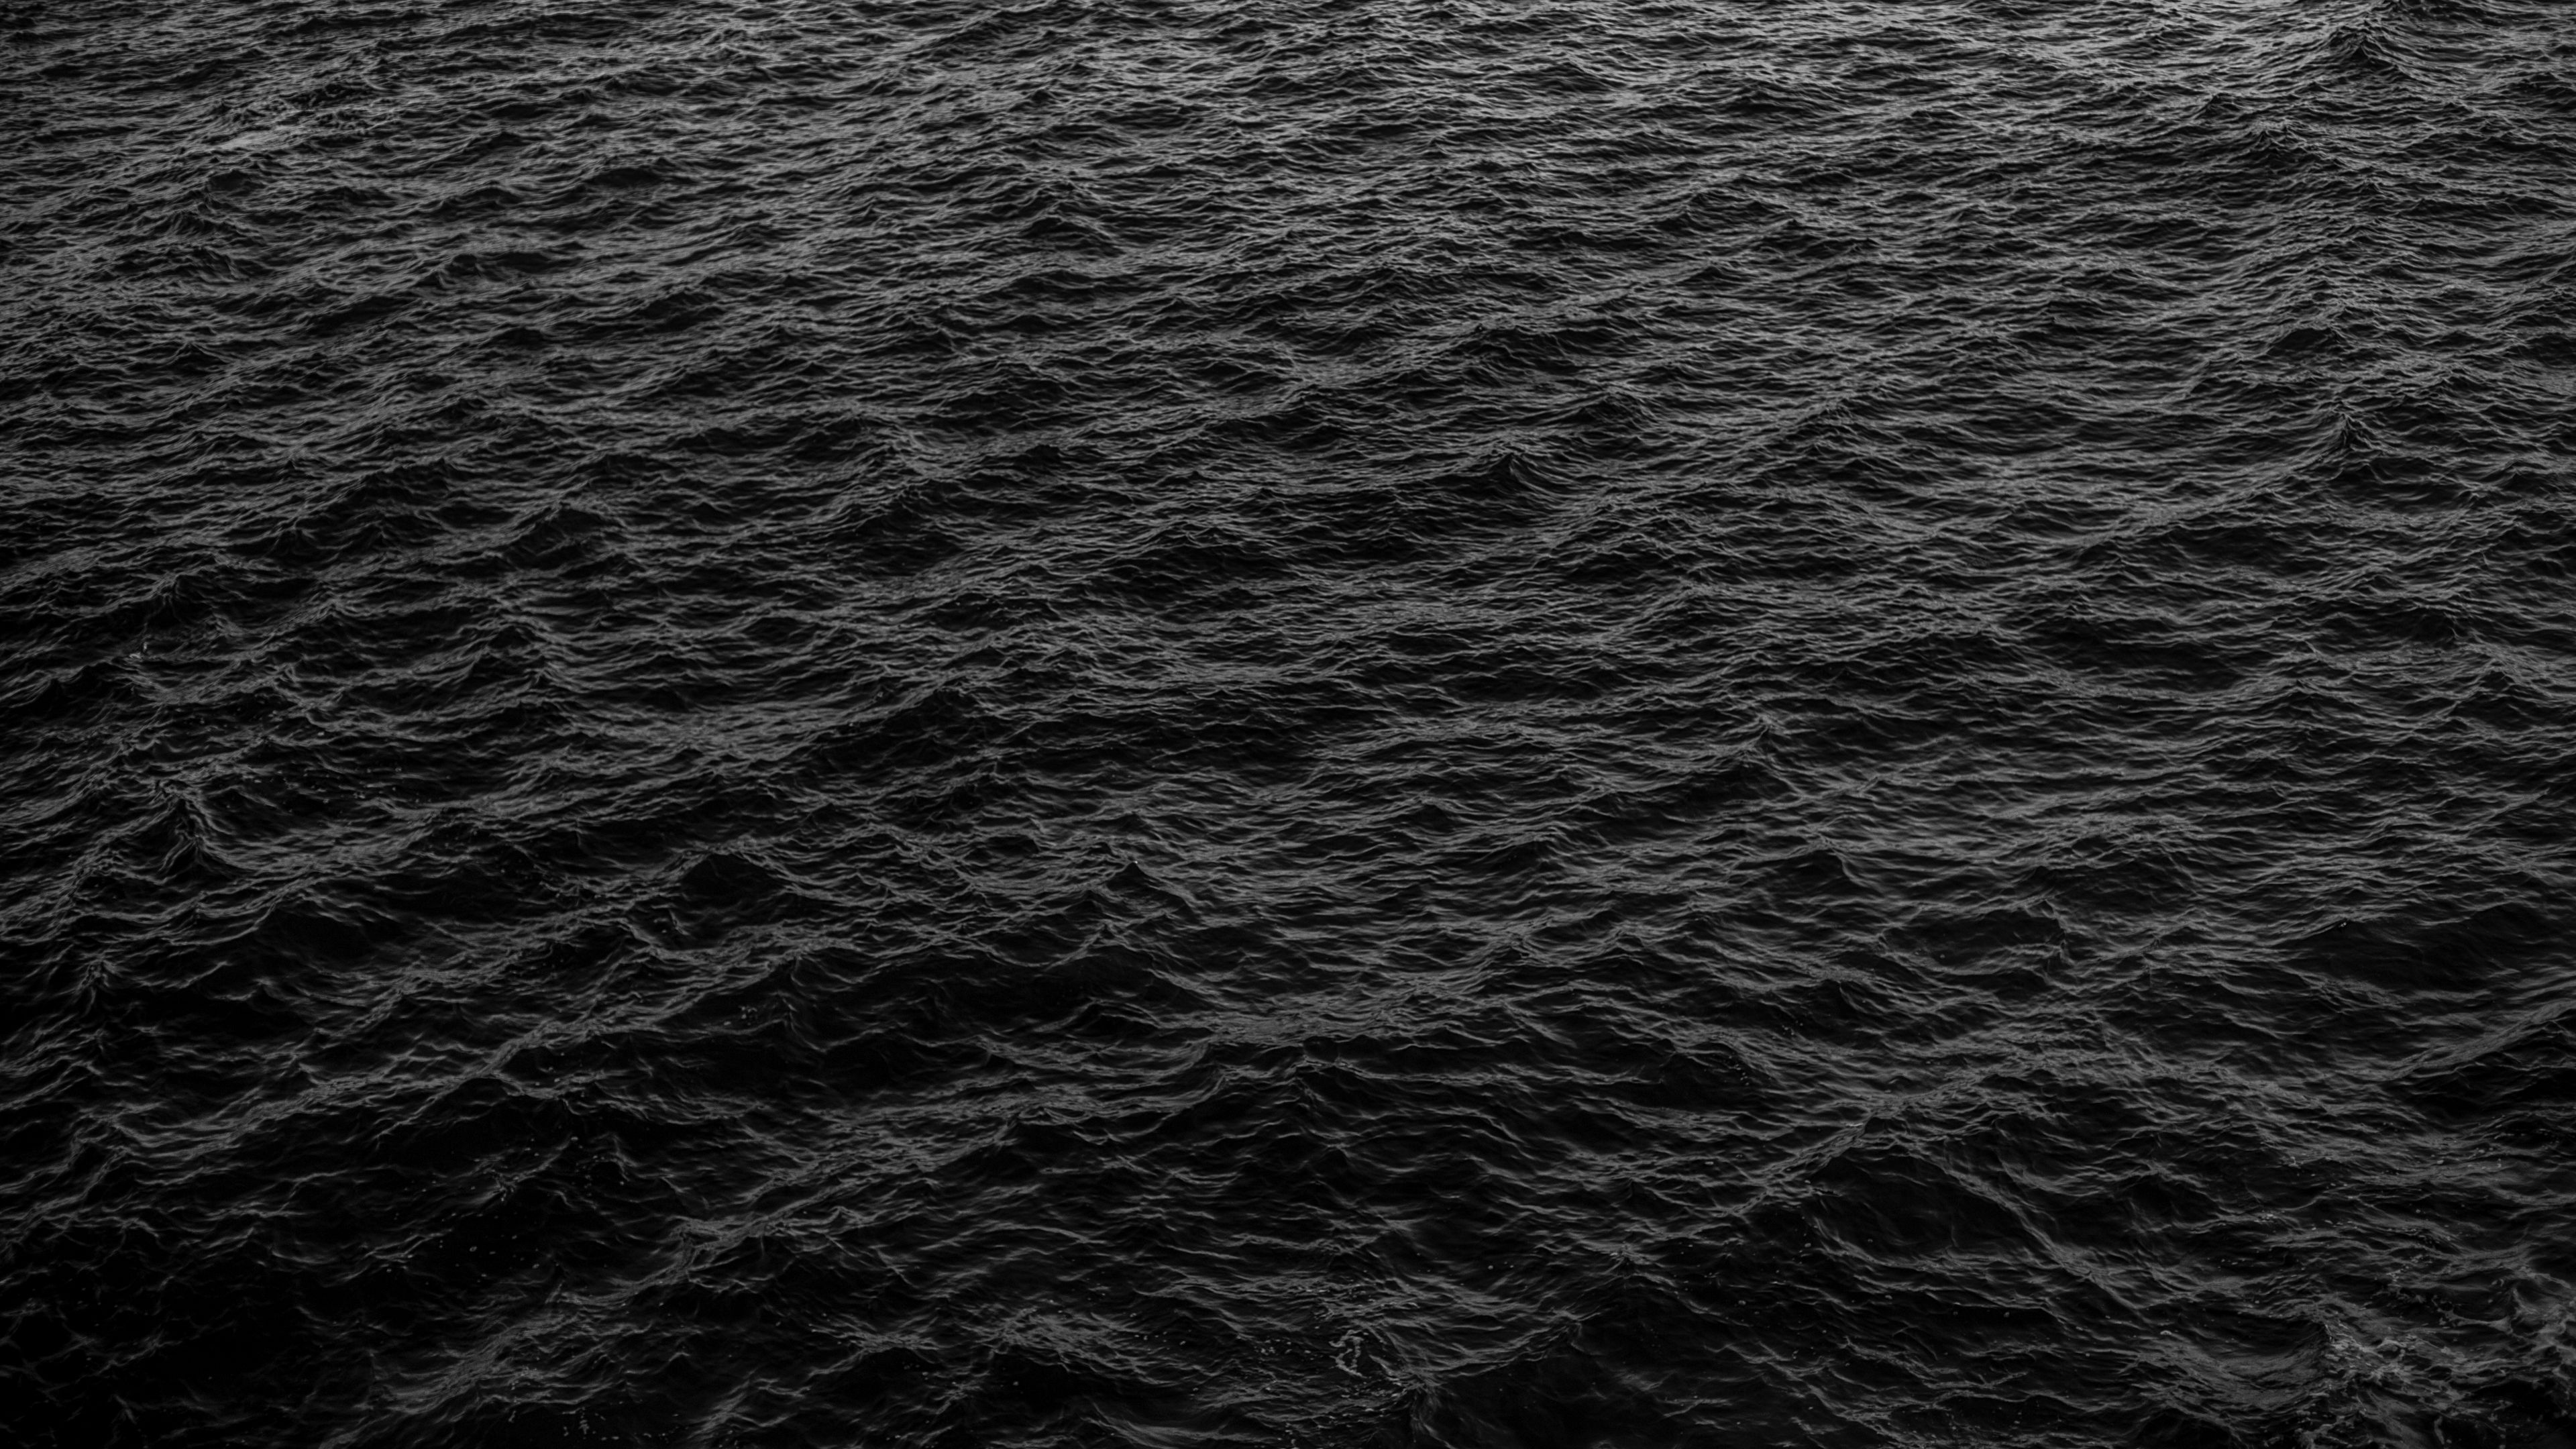 Download wallpapers 3840x2160 sea, waves, black, surface, water 4k uhd 16:9...